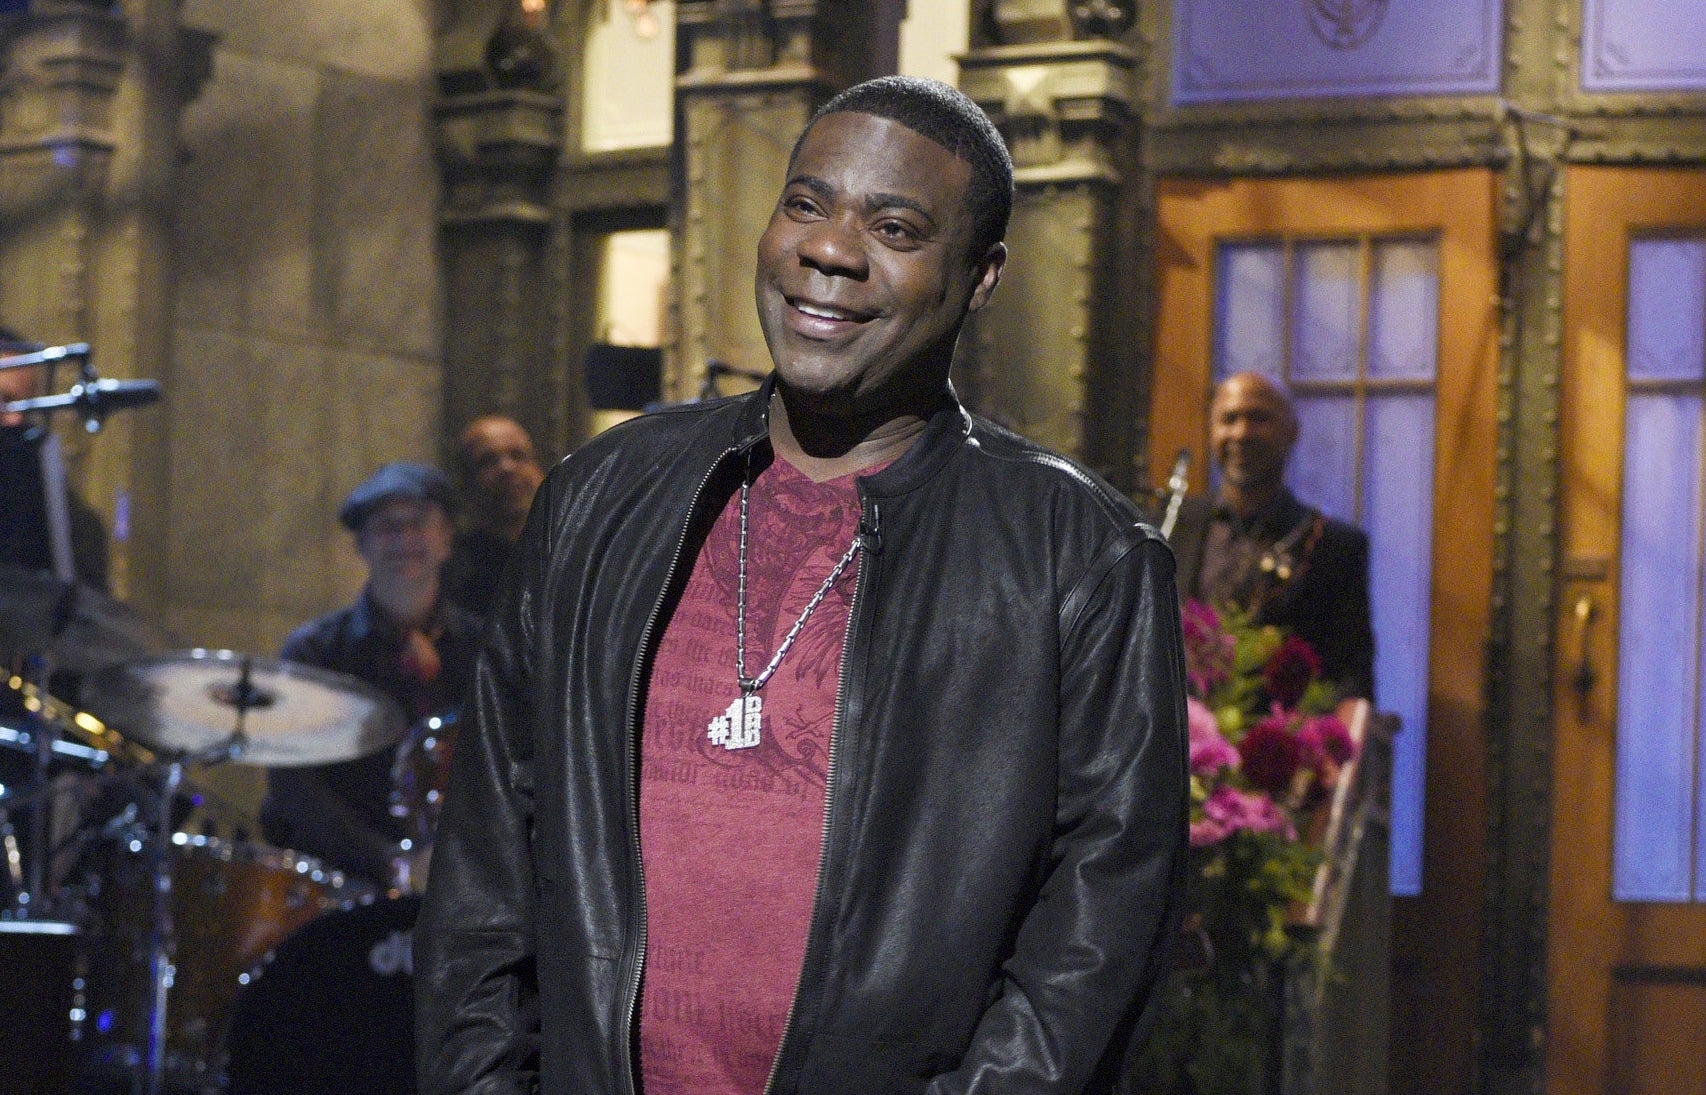 Tracy Morgan hosting SNL on stage